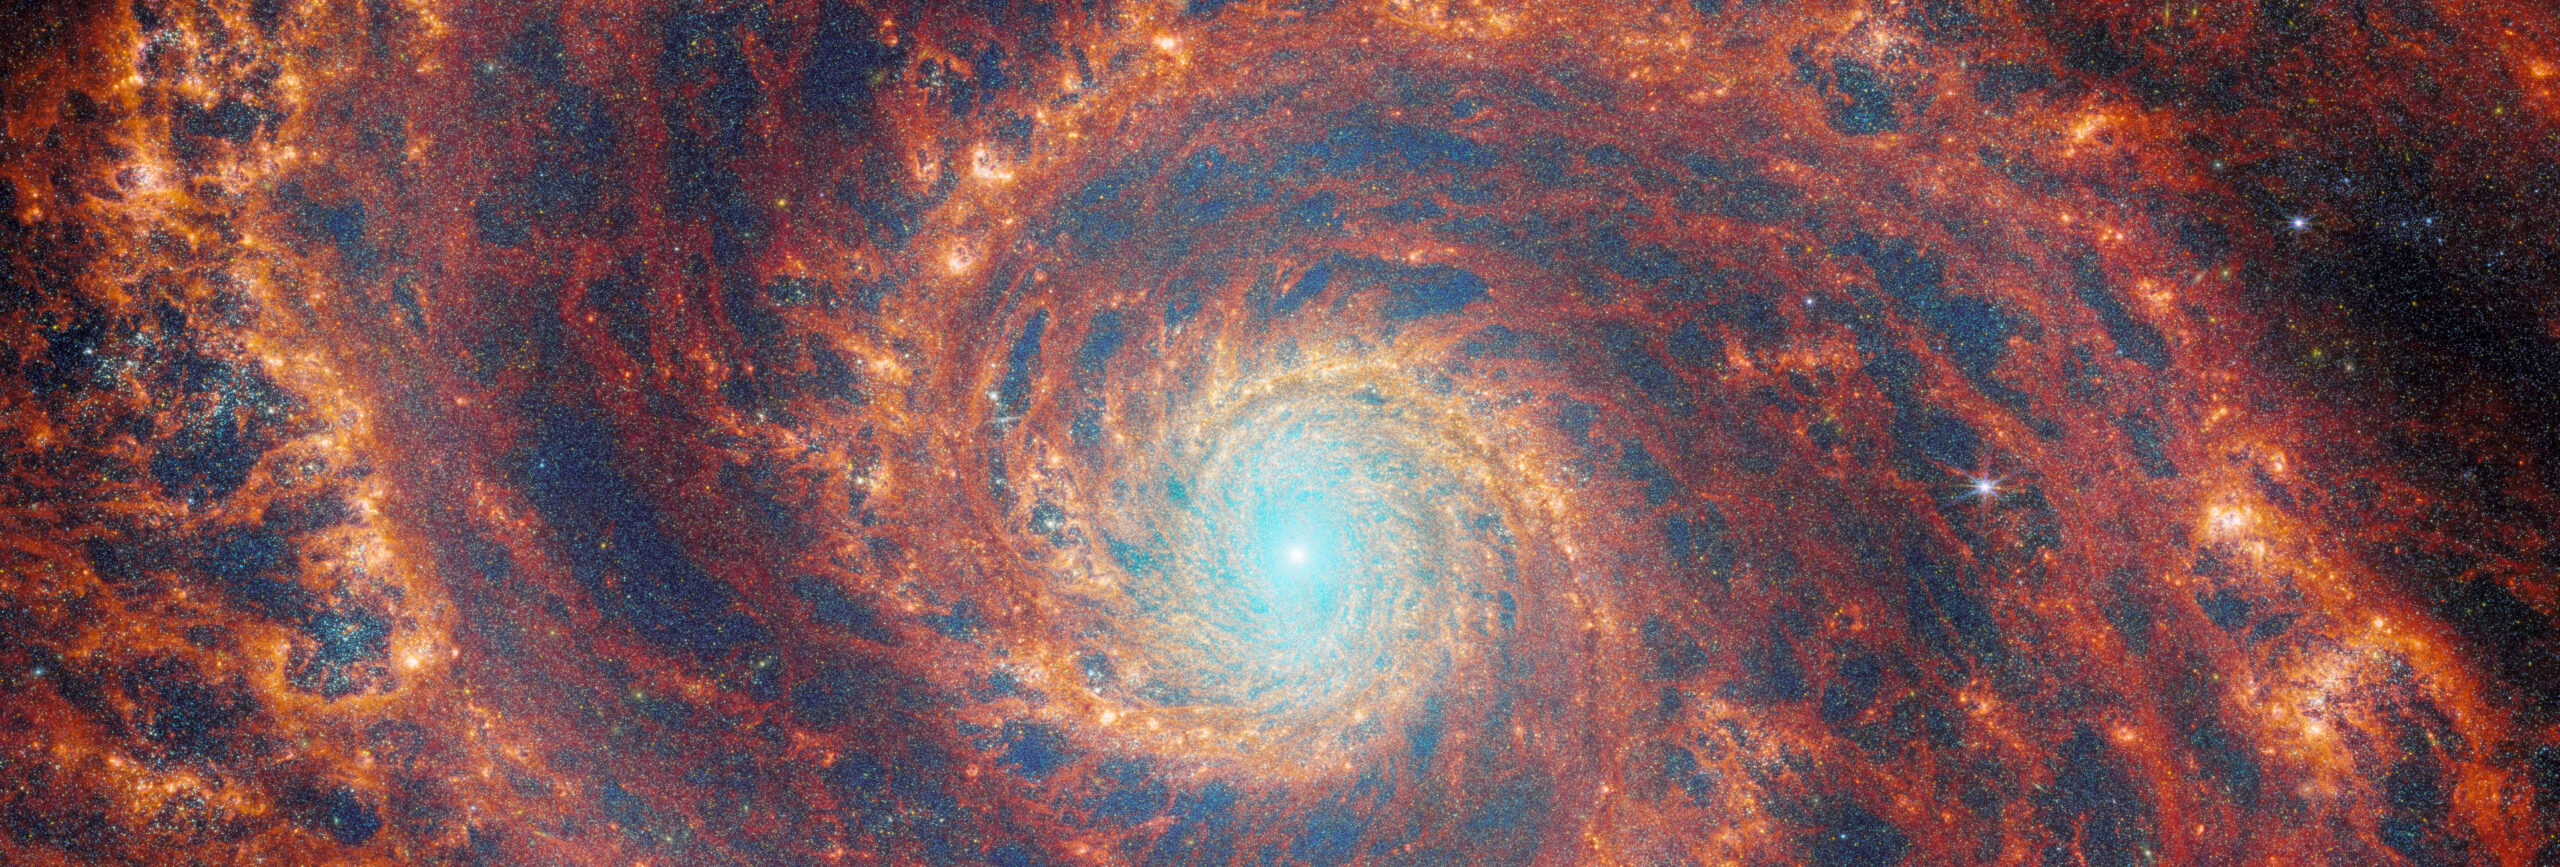 A large spiral galaxy takes up the entirety of the image. The core is mostly bright white, but there are also swirling, detailed structures that resemble water circling a drain. There is white and pale blue light that emanates from stars and dust at the core’s center, but it is tightly limited to the core. The rings feature colors of deep red and orange and highlight filaments of dust around cavernous black bubbles